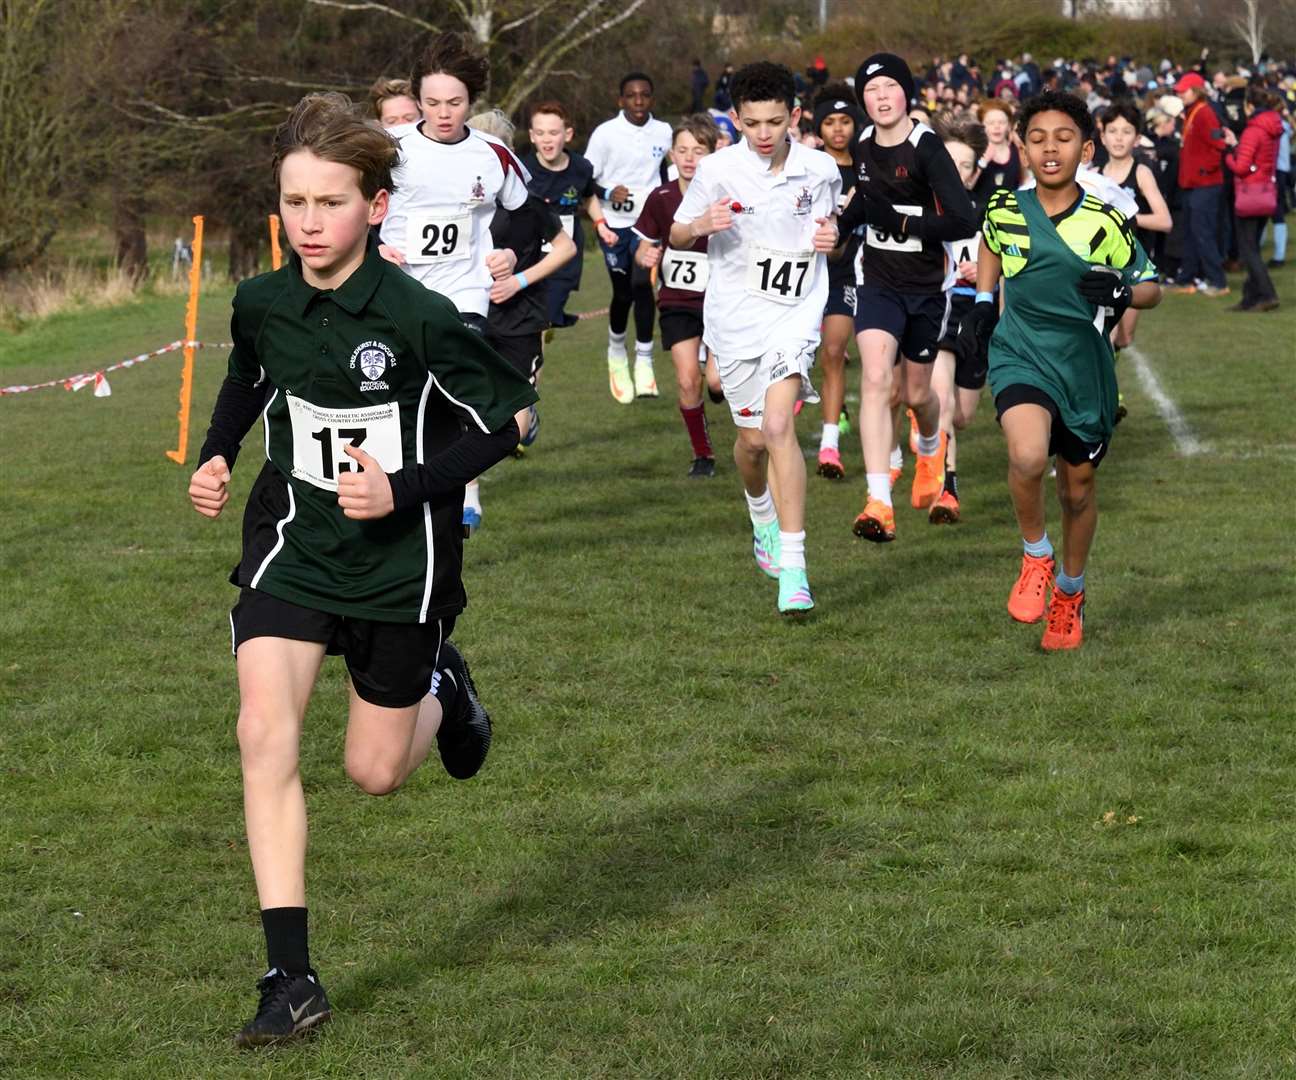 Murphy McDonagh won the Year 7 boys’ race for Bexley. Picture: Simon Hildrew